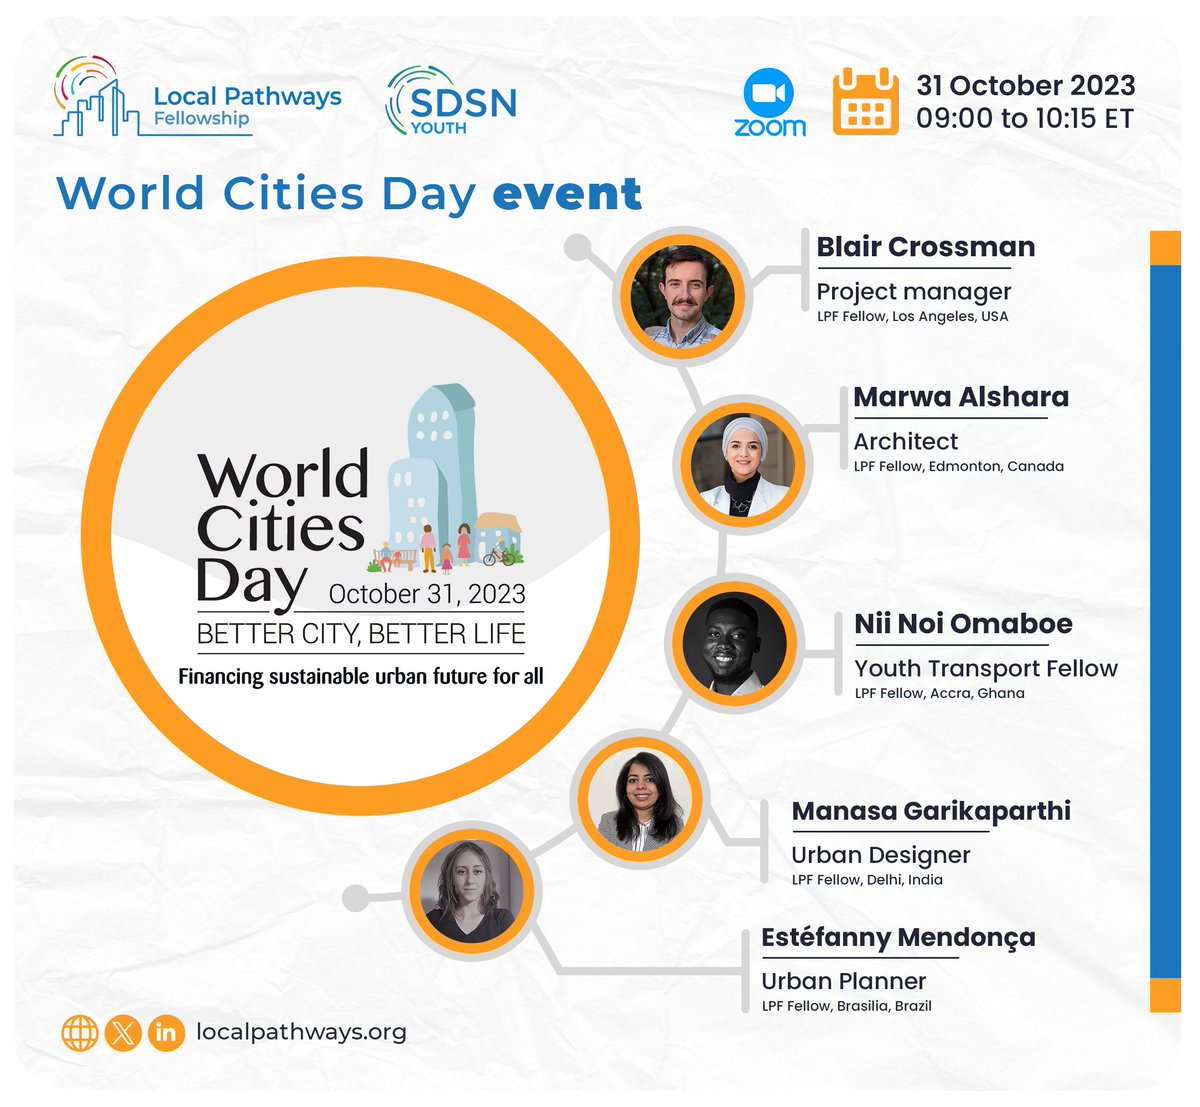 🌆 Join us on October 31st for a deep dive into urban sustainability as we celebrate #WorldCitiesDay! 🏙️ This year's theme: Financing a sustainable urban future for all. Register now for our exciting event! docs.google.com/forms/d/e/1FAI… #LocalPathwaysFellowship #SustainableCities